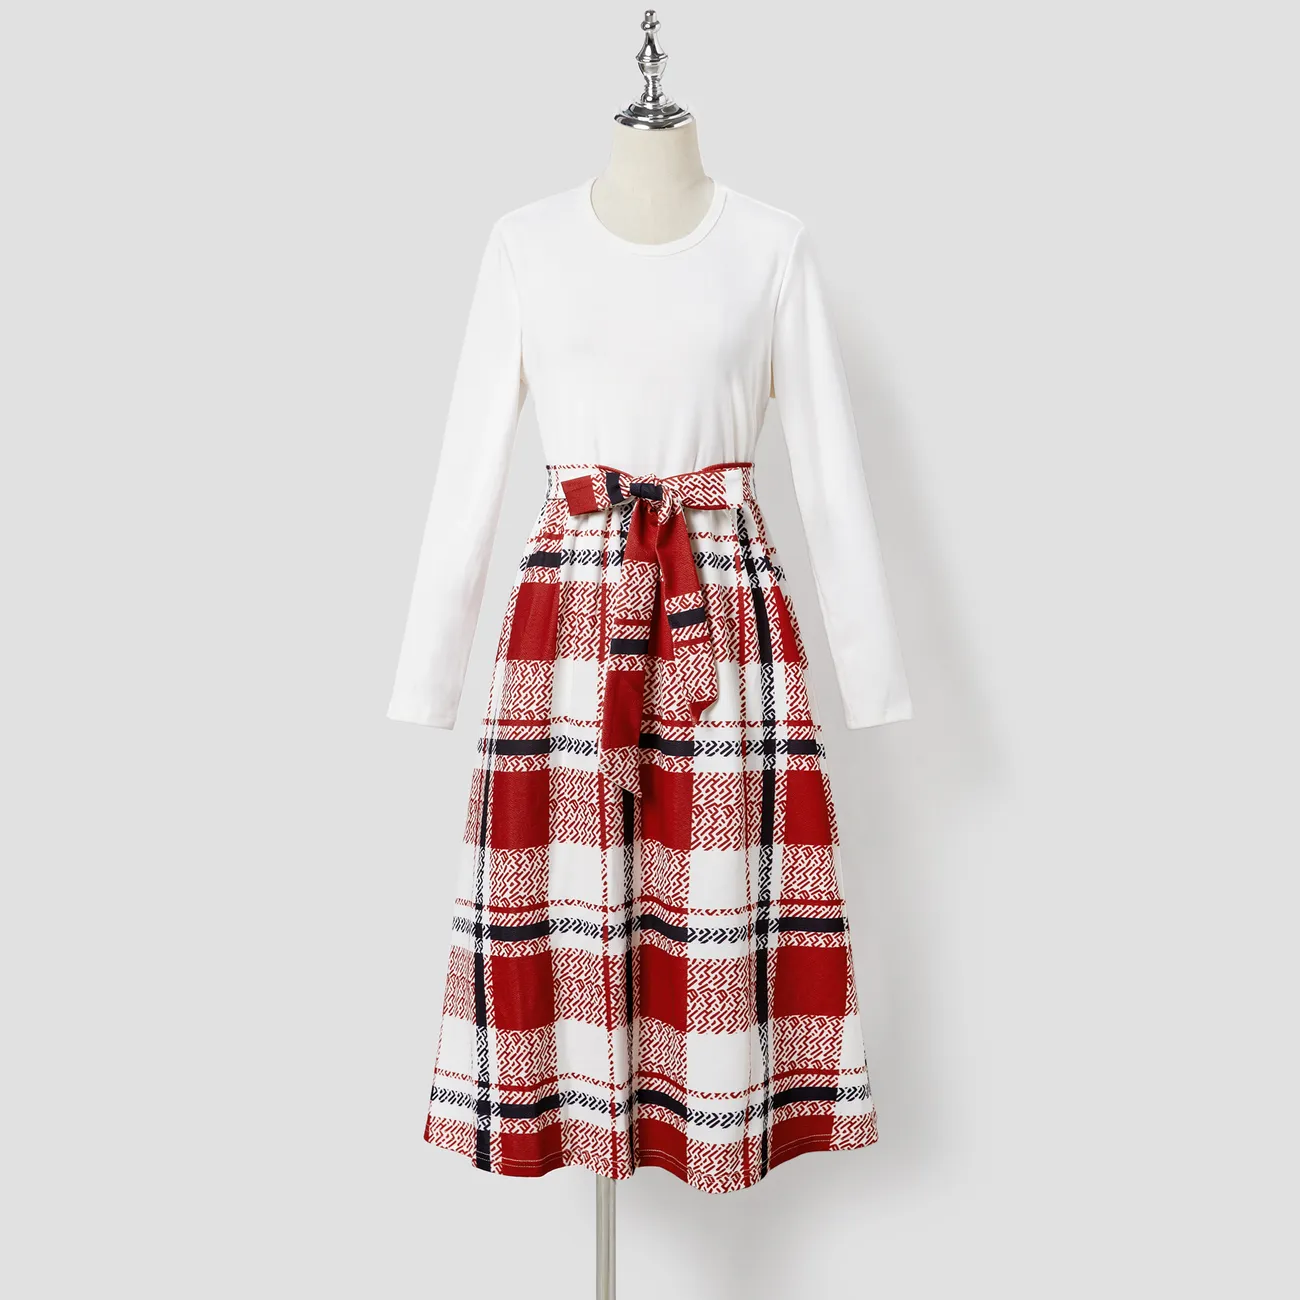 Family Matching Casual Long-sleeve Color-block Tops & Grid/Houndstooth Belted Dresses Sets  White big image 1